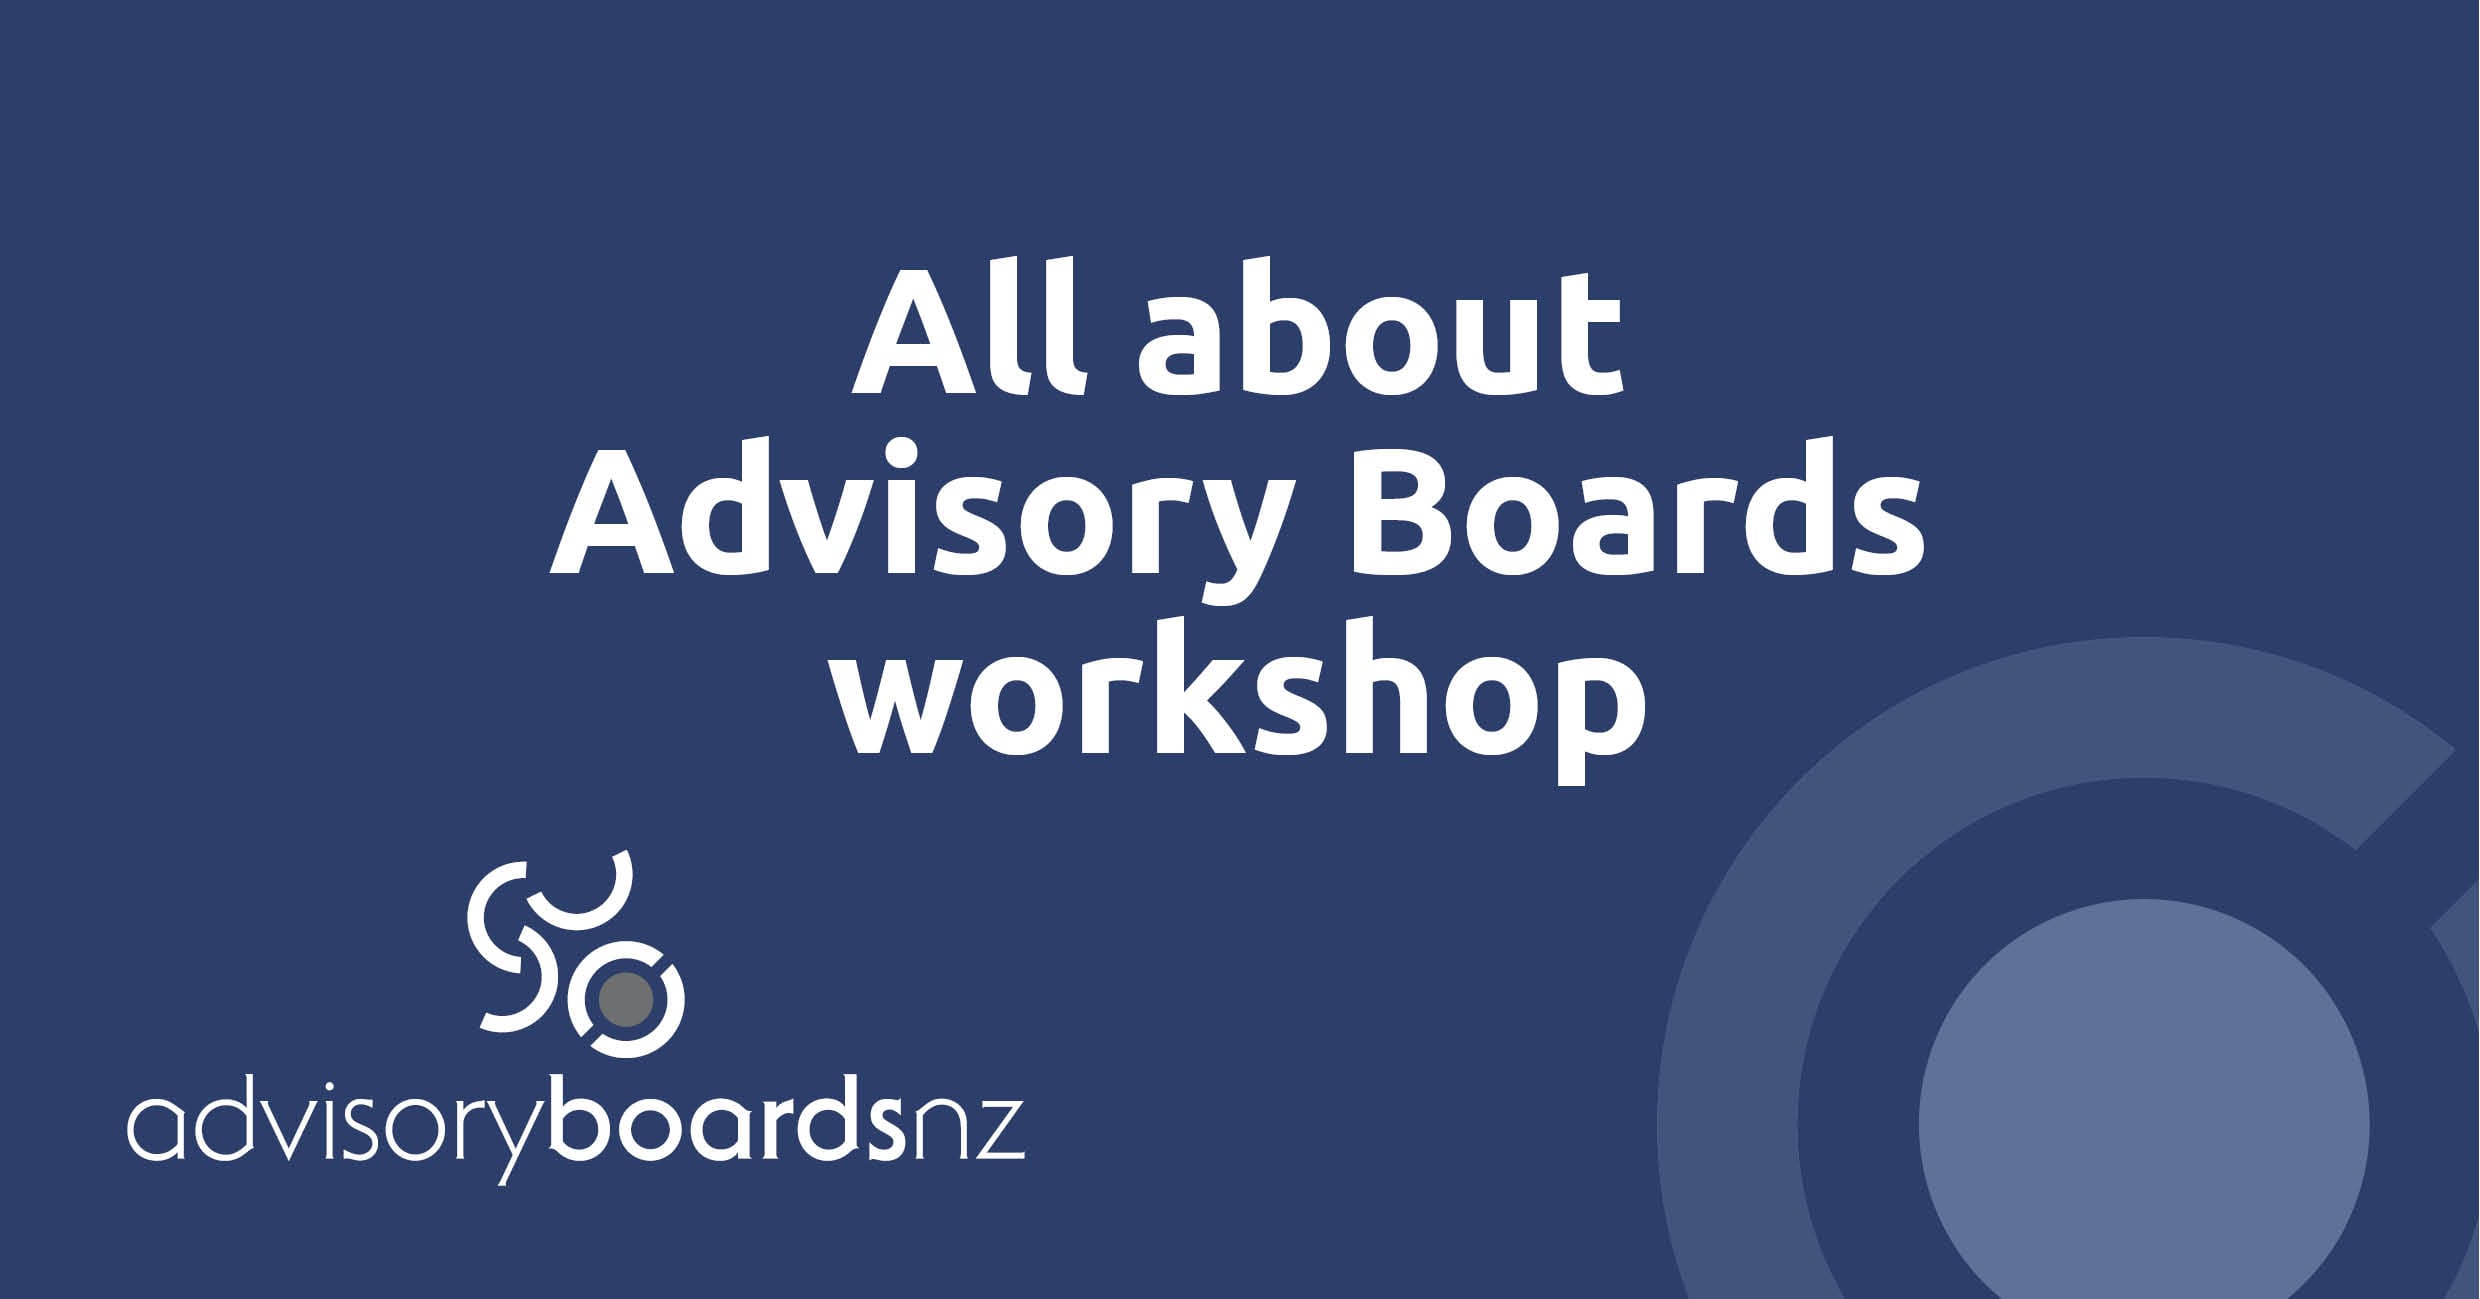 All About Advisory Boards Workshop - Wellington